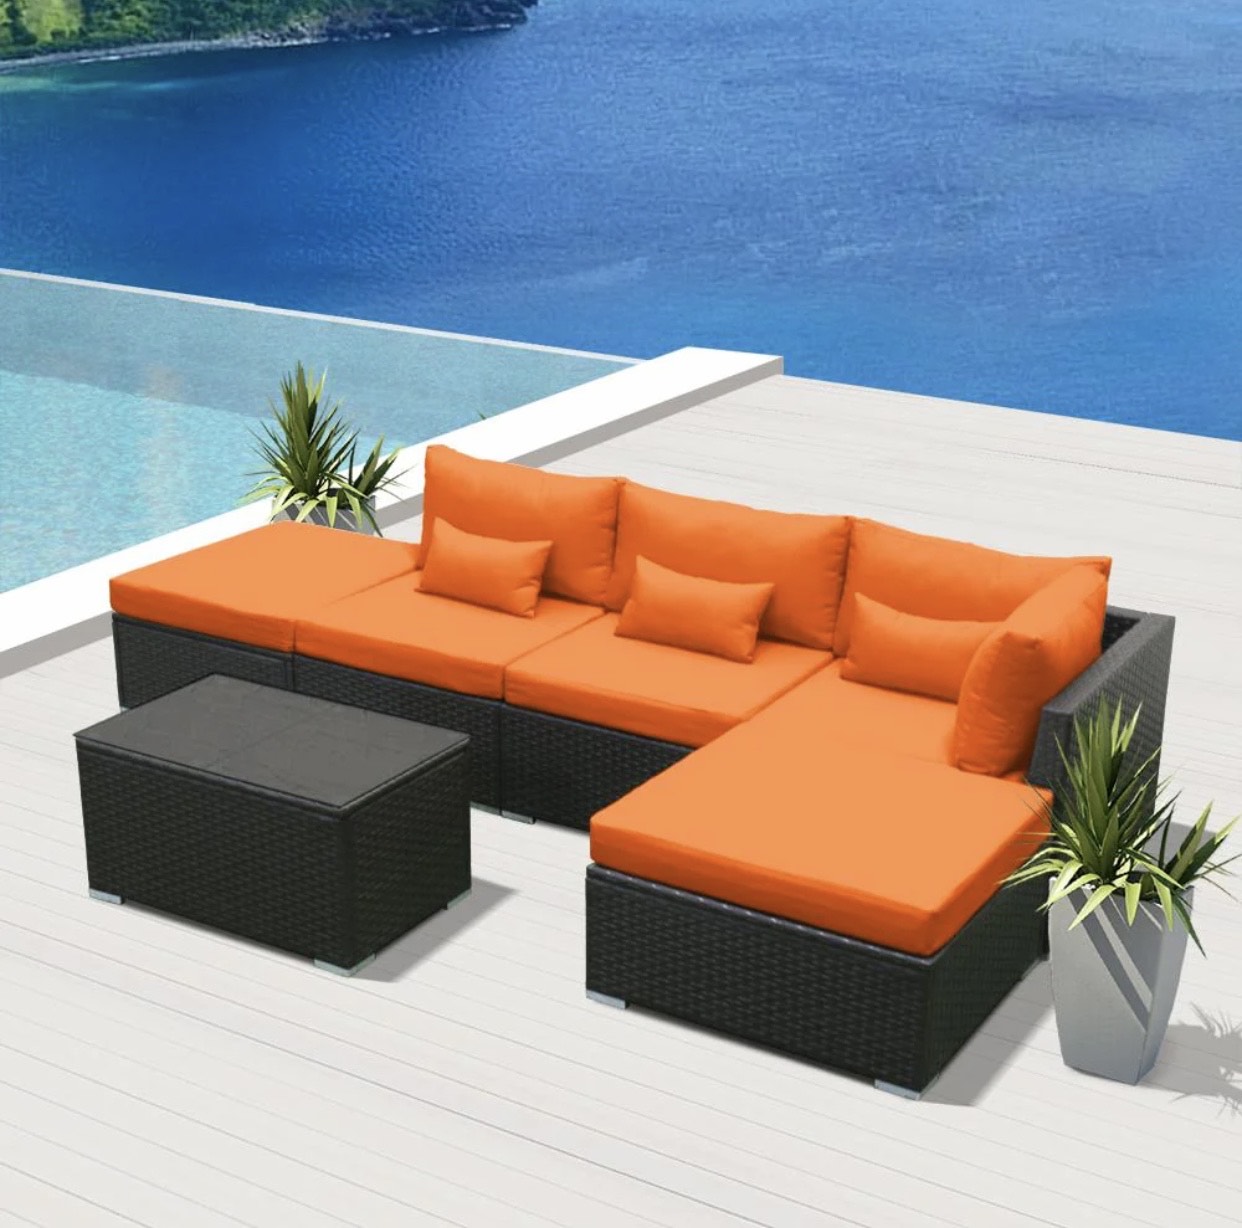 Orange 6 Replacement Cushion Covers Set (Without Foam Insis)